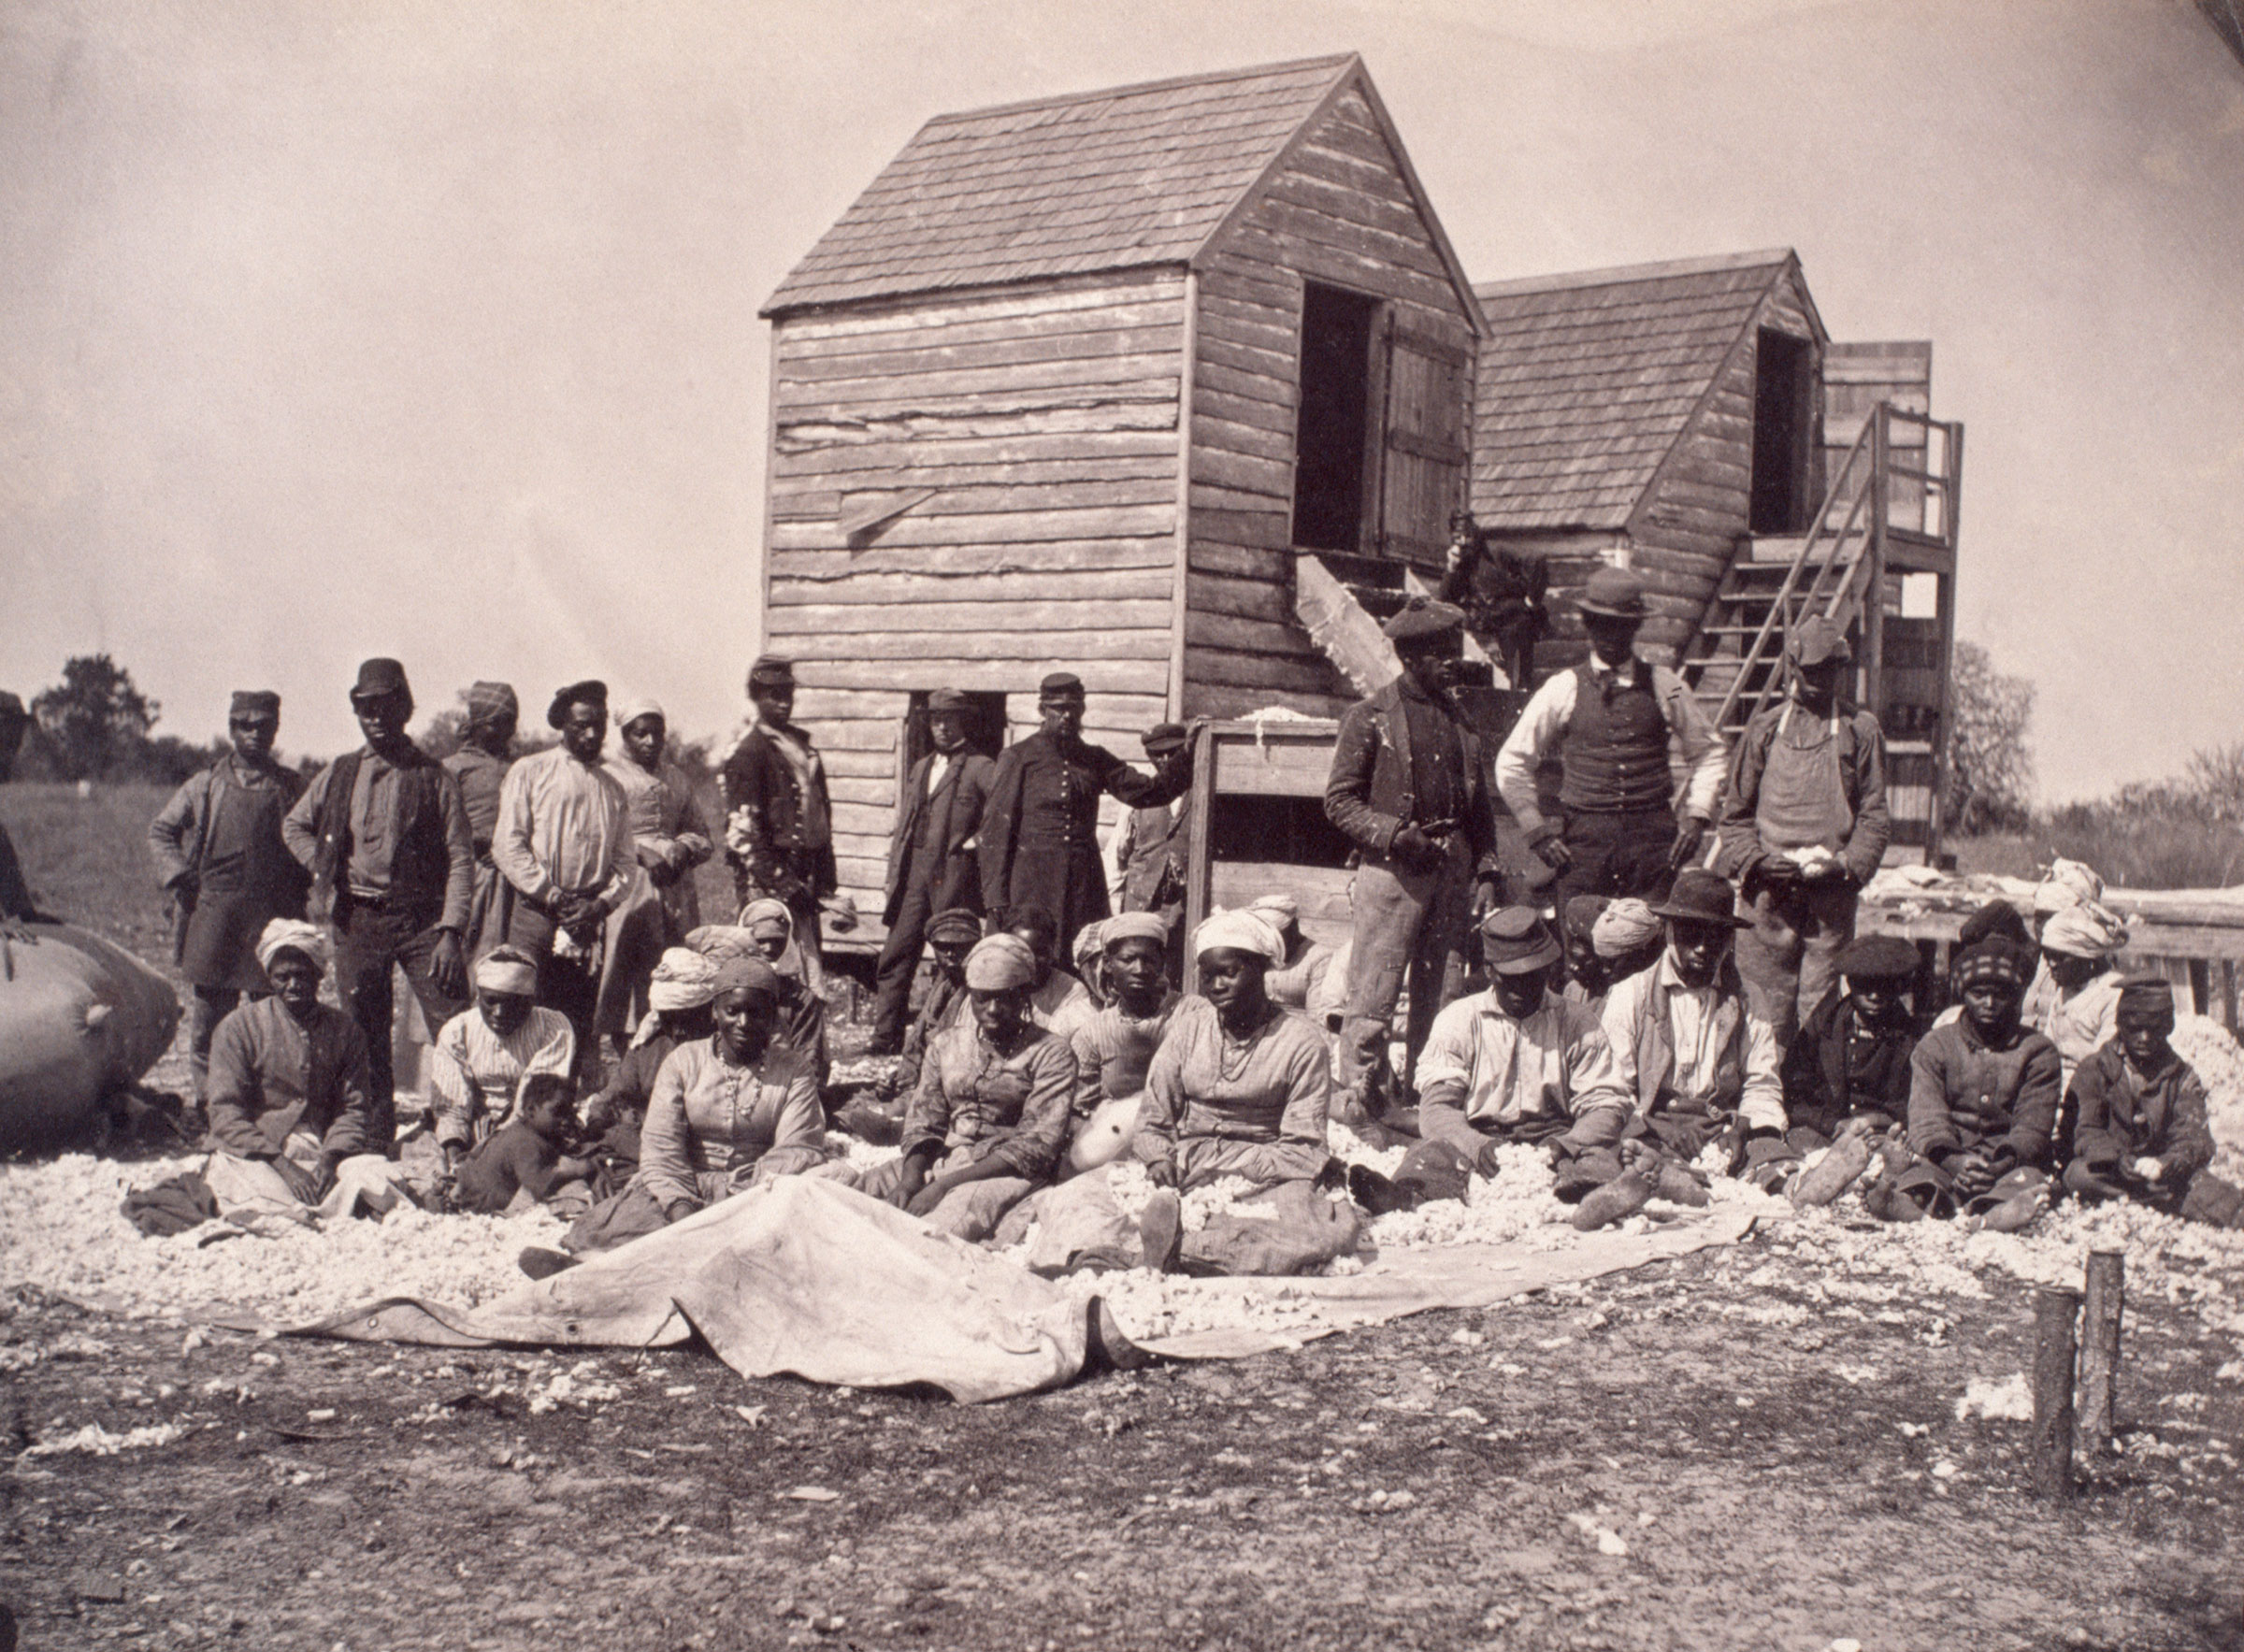 A group of escaped slaves that gathered on the former plantation of Confederate General Thomas Drayton. After Federal troops occupied the plantation these former slaves began to harvest and gin cotton for their own profit, circa 1862. (Corbis/Getty Images)